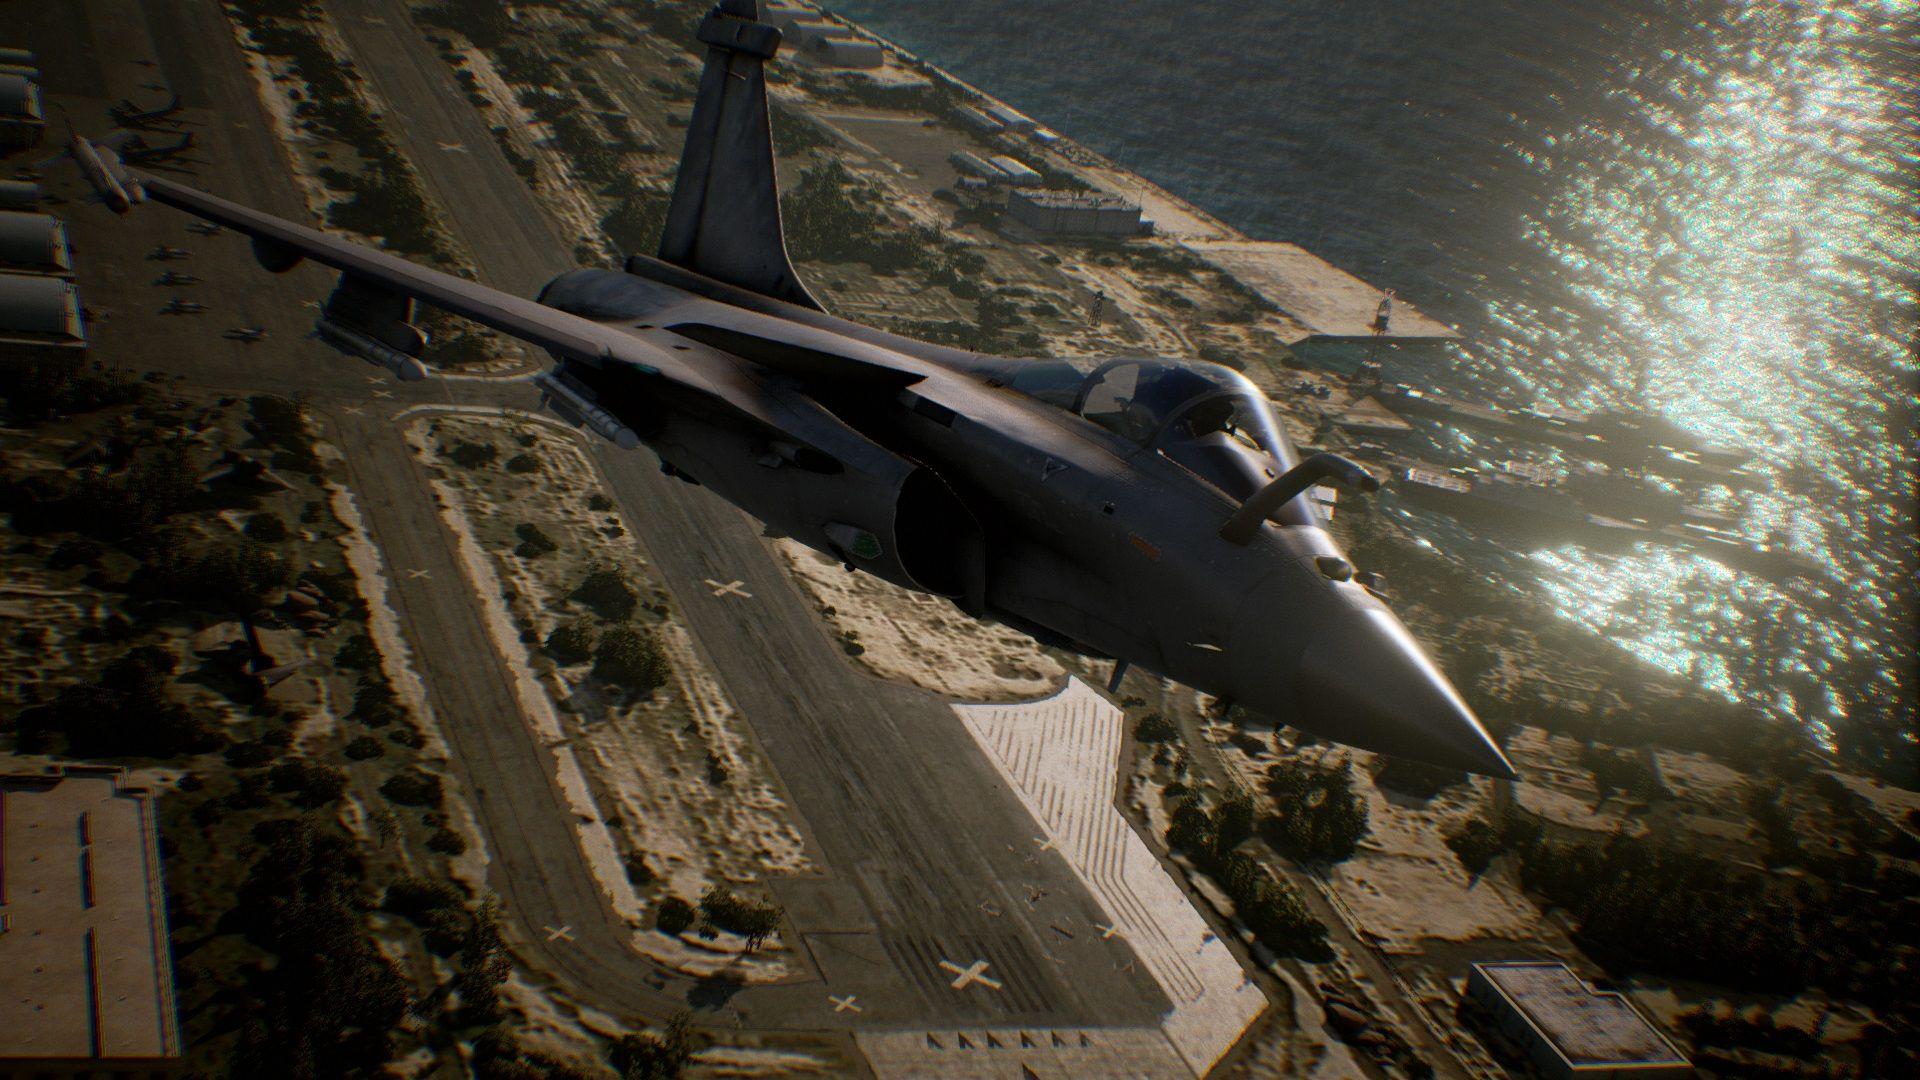 Preview: Ace Combat 7 Brings Pulse Pounding Aerial Dogfights To PS VR